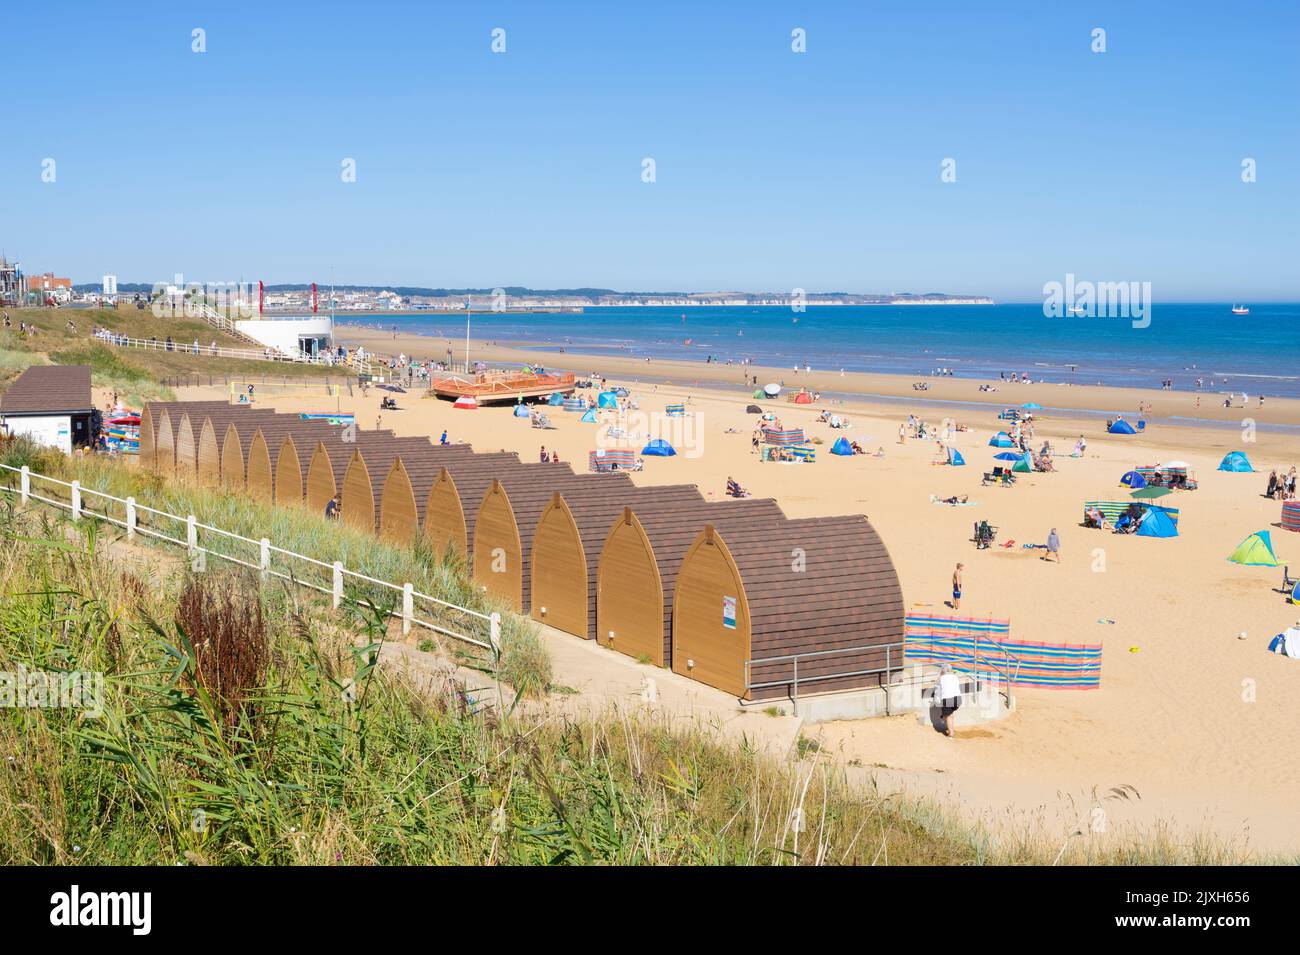 Bridlington Beach Yorkshire South beach huts tourists holidaymakers and people sunbathing on the beach at Bridlington Yorkshire England UK GB Europe Stock Photo